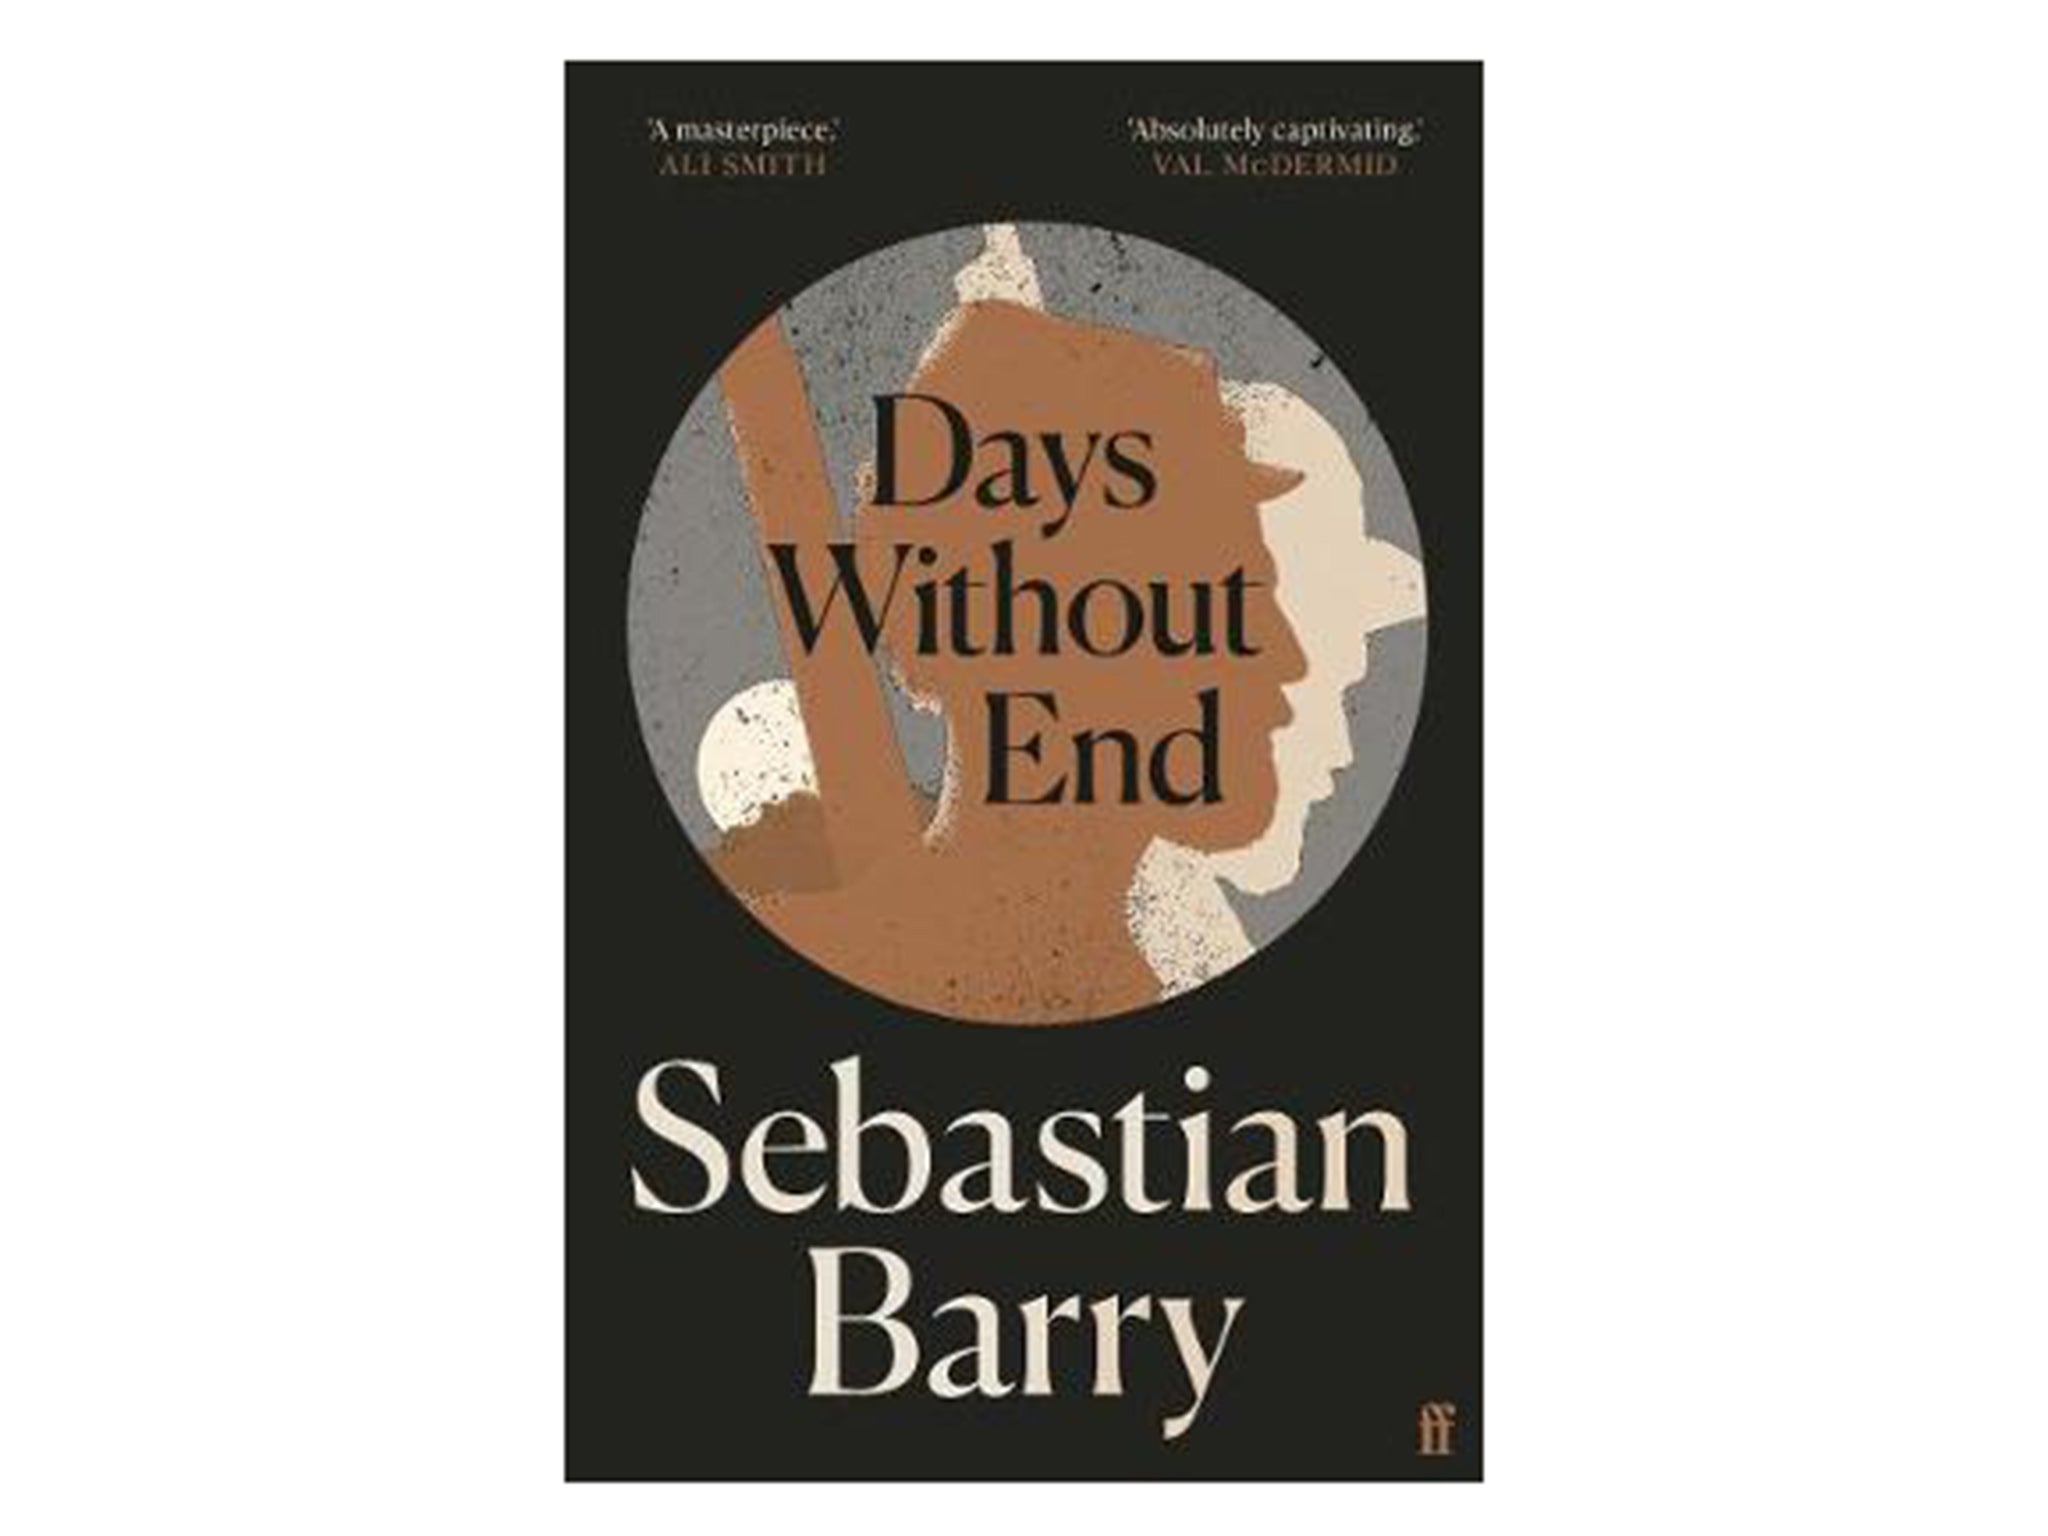 days-without-end-barry-costa-book-award-indybest.jpg